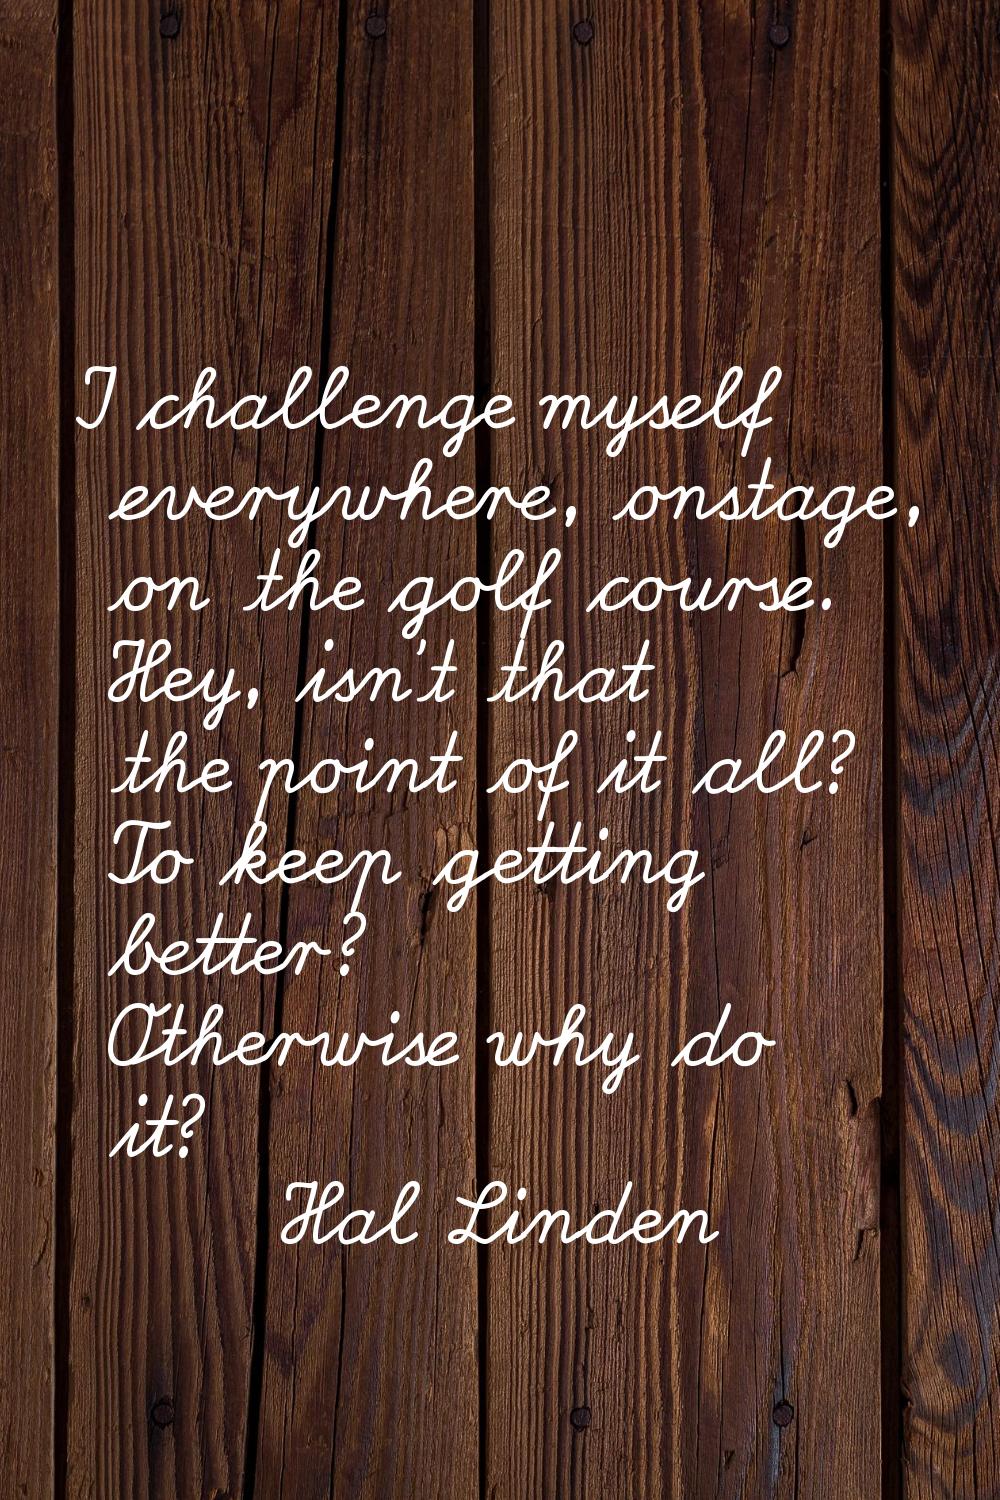 I challenge myself everywhere, onstage, on the golf course. Hey, isn't that the point of it all? To